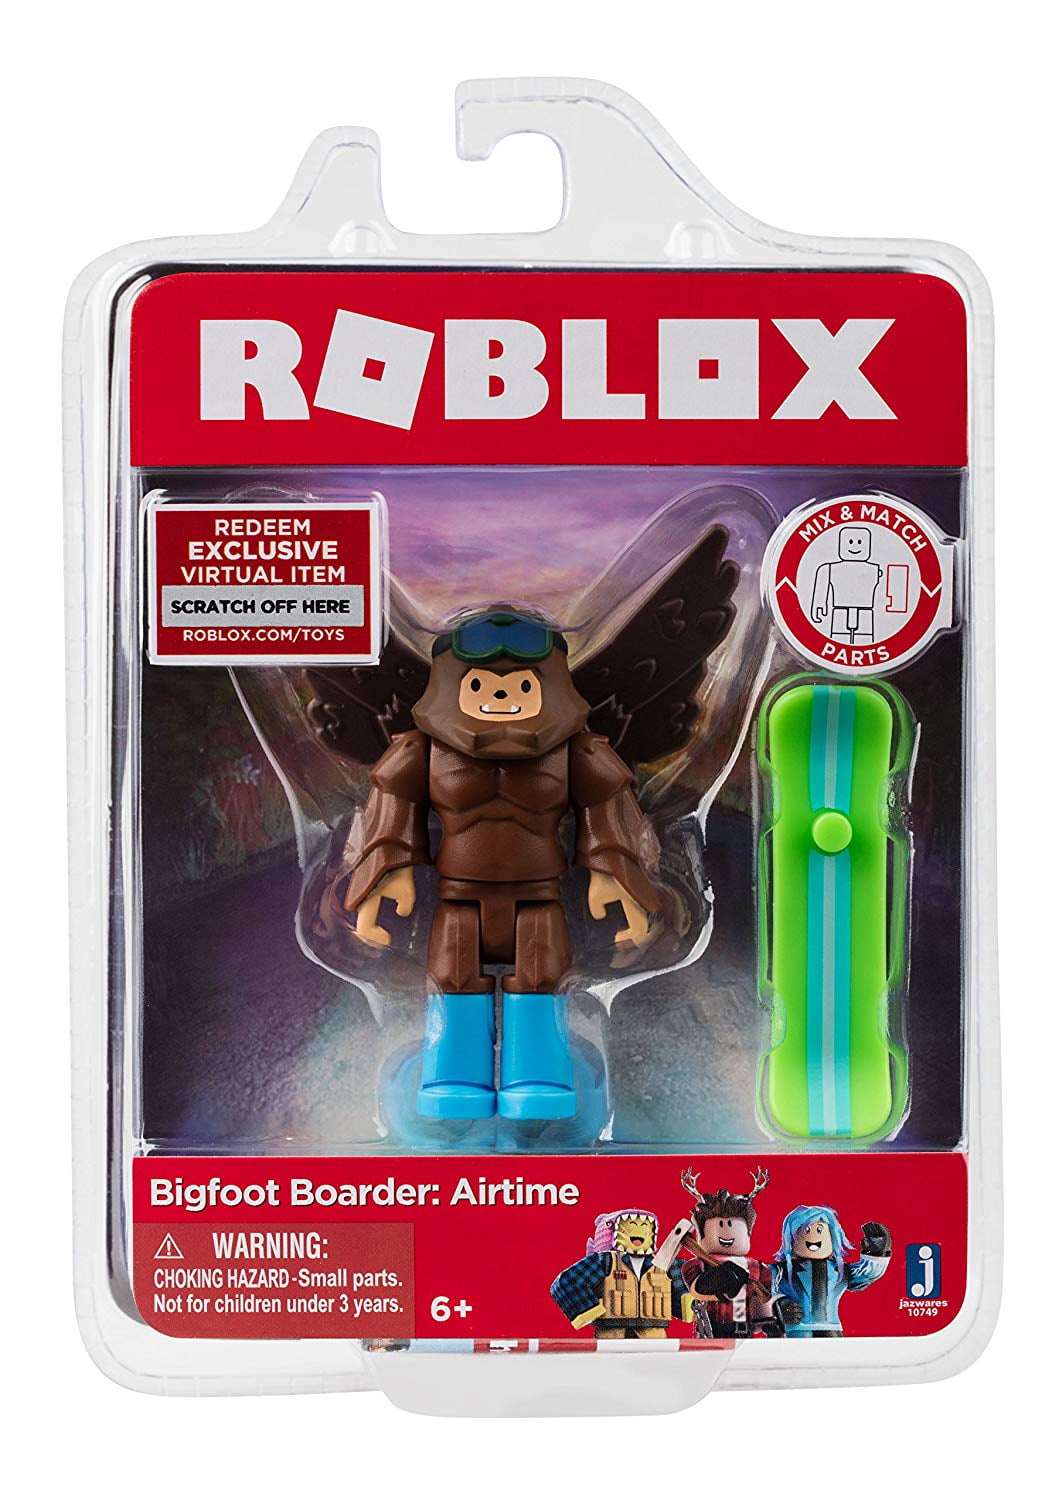 Bigfoot Boarder Airtime Figure With Exclusive Virtual Item Game Code Roblox Bigfoot Boarder Airtime Figure Packwalmartes With One Figure Accessories By Roblox Walmart Com Walmart Com - codigos de robloxcomtoys